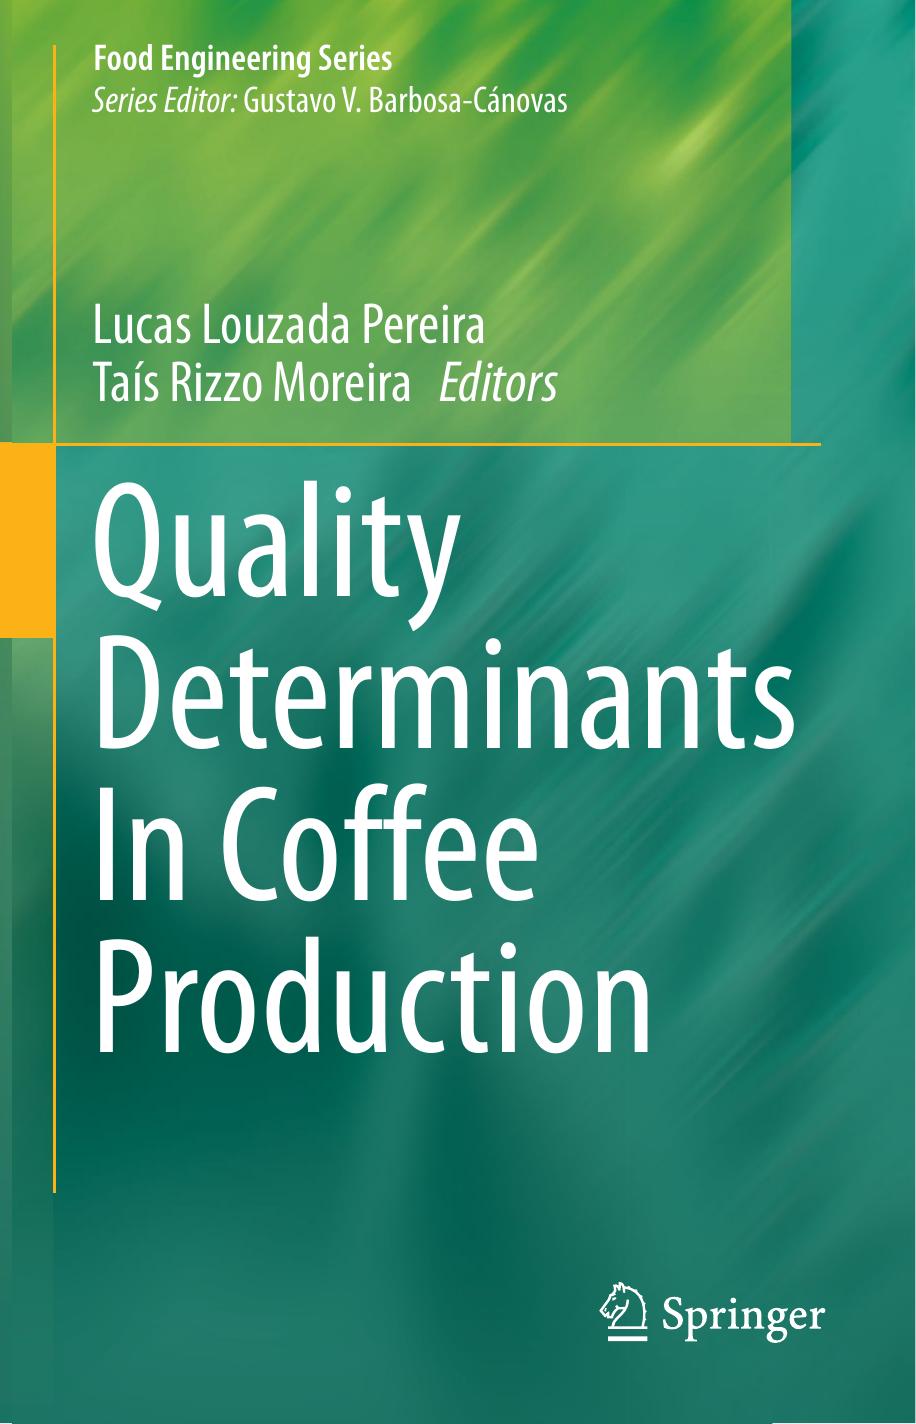 Quality Determinants In Coffee Production-Springer (2021)